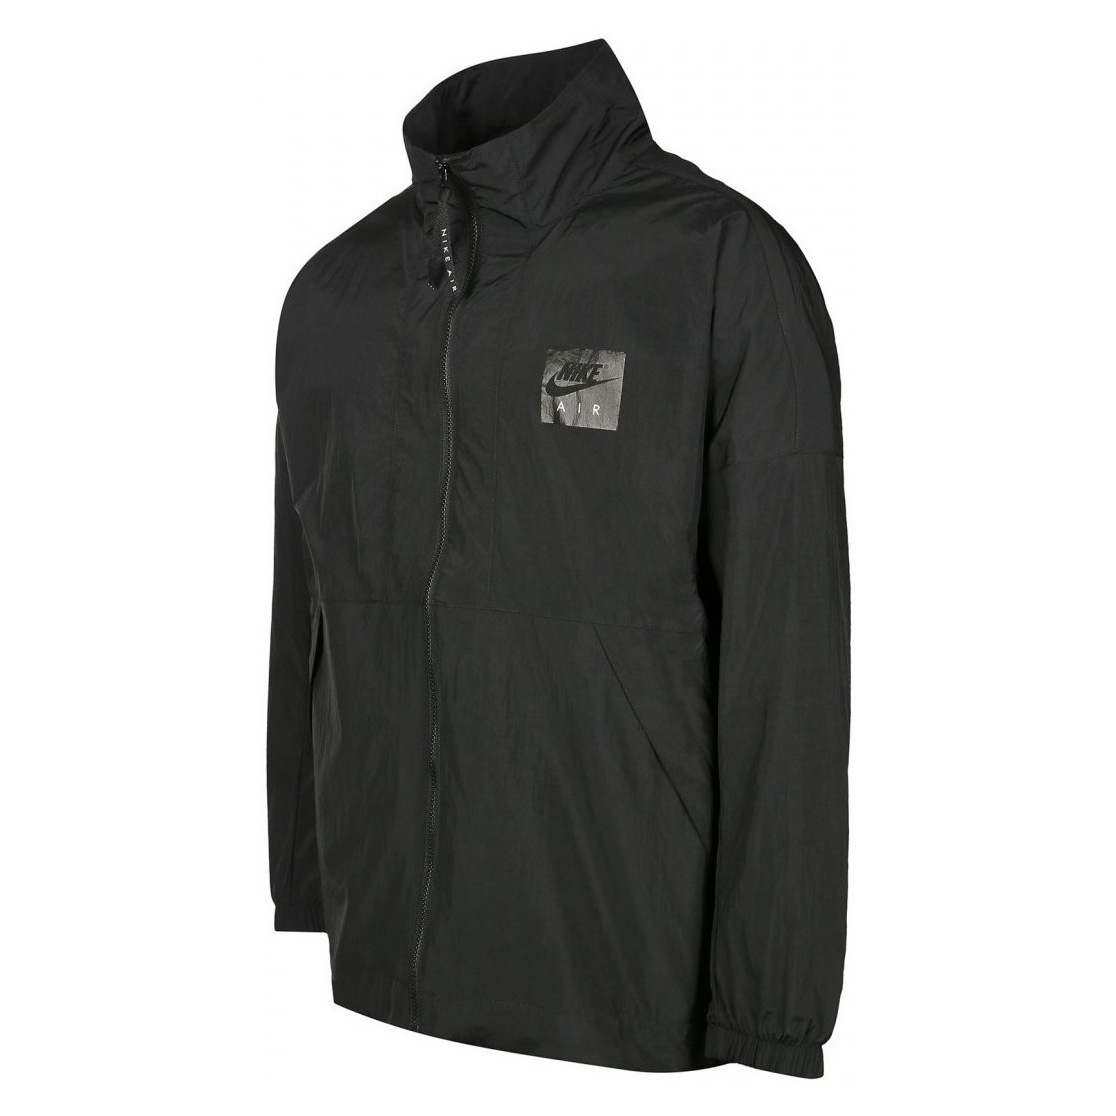 Nike NSW Varsity Air Woven Jacket - Clothes Jackets - Sporting goods ...